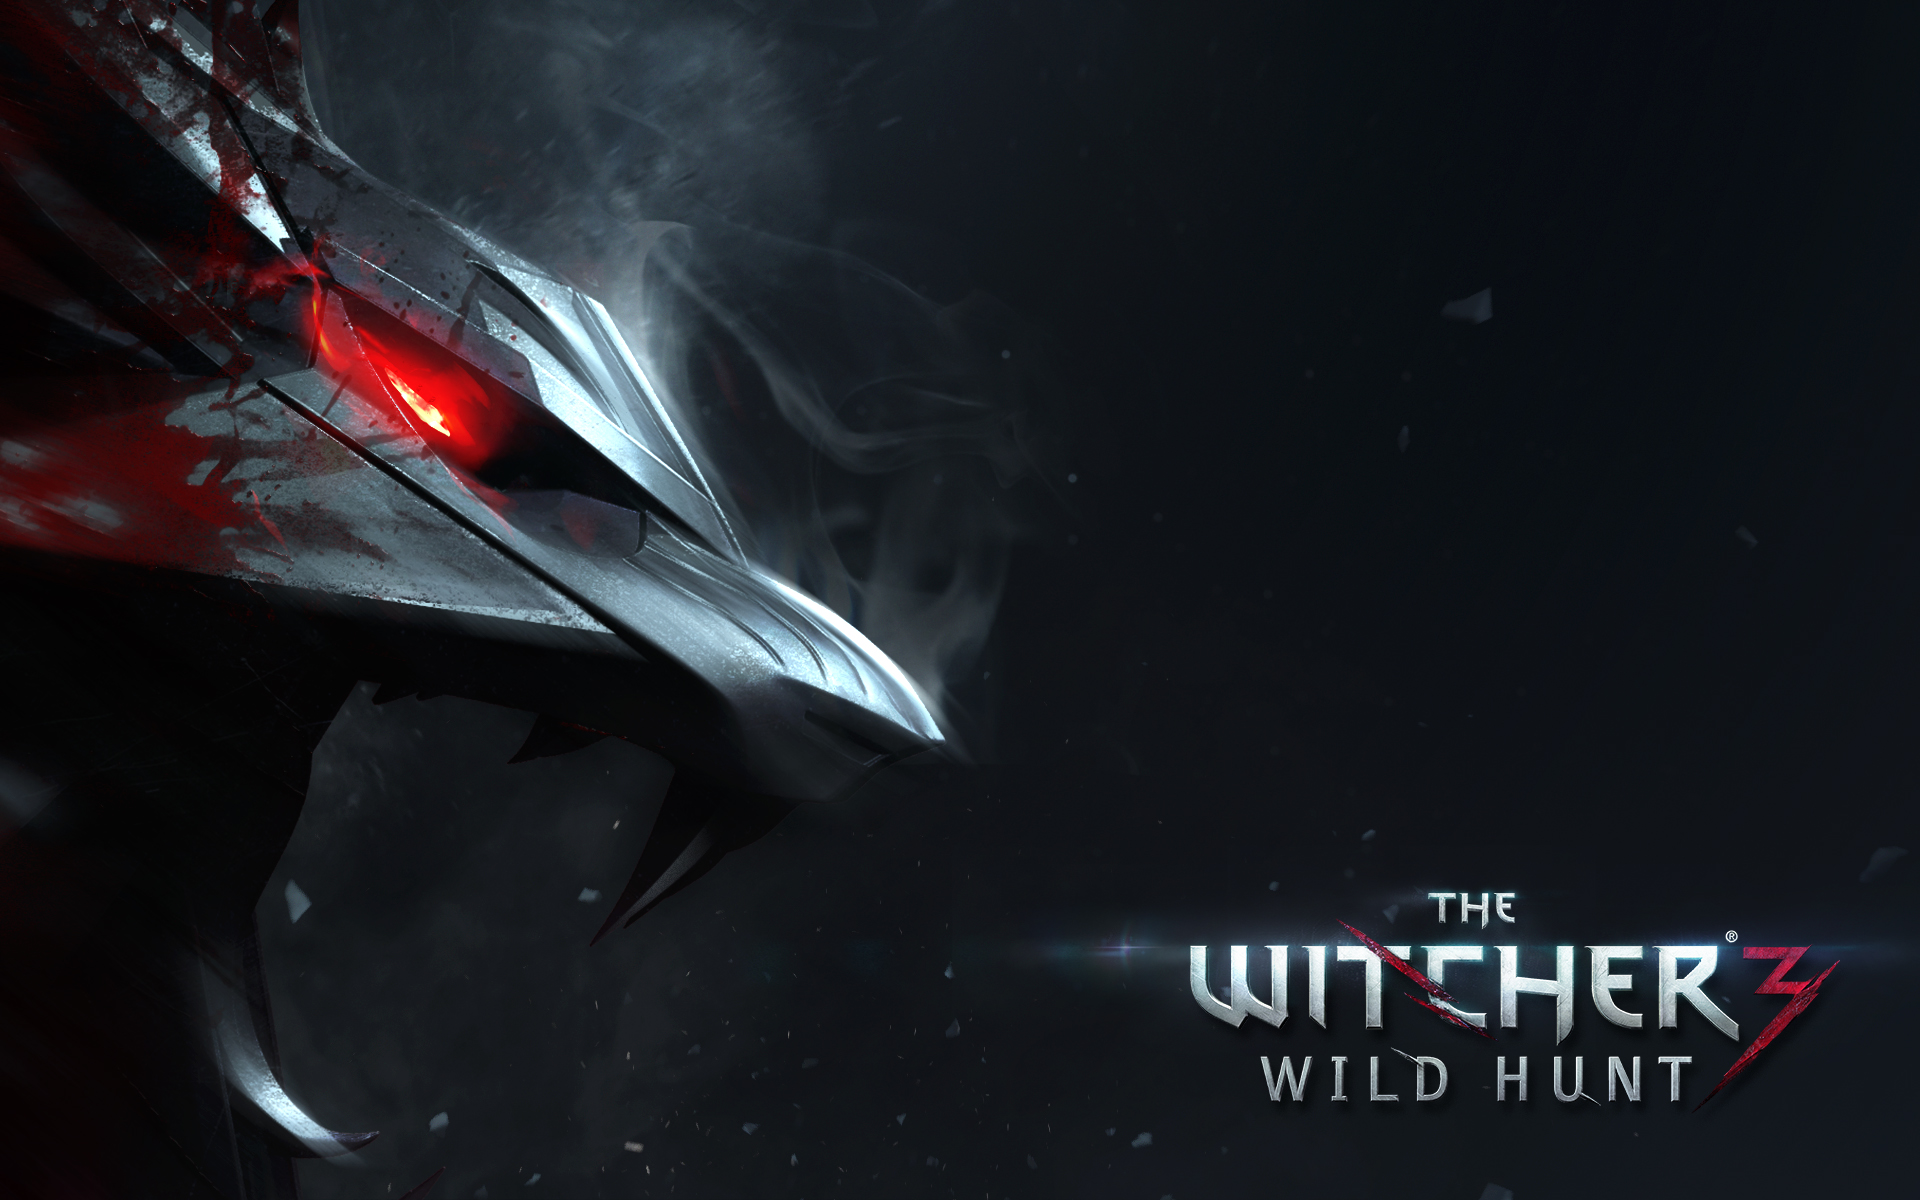 The Witcher Wild Hunt Wallpaper HD